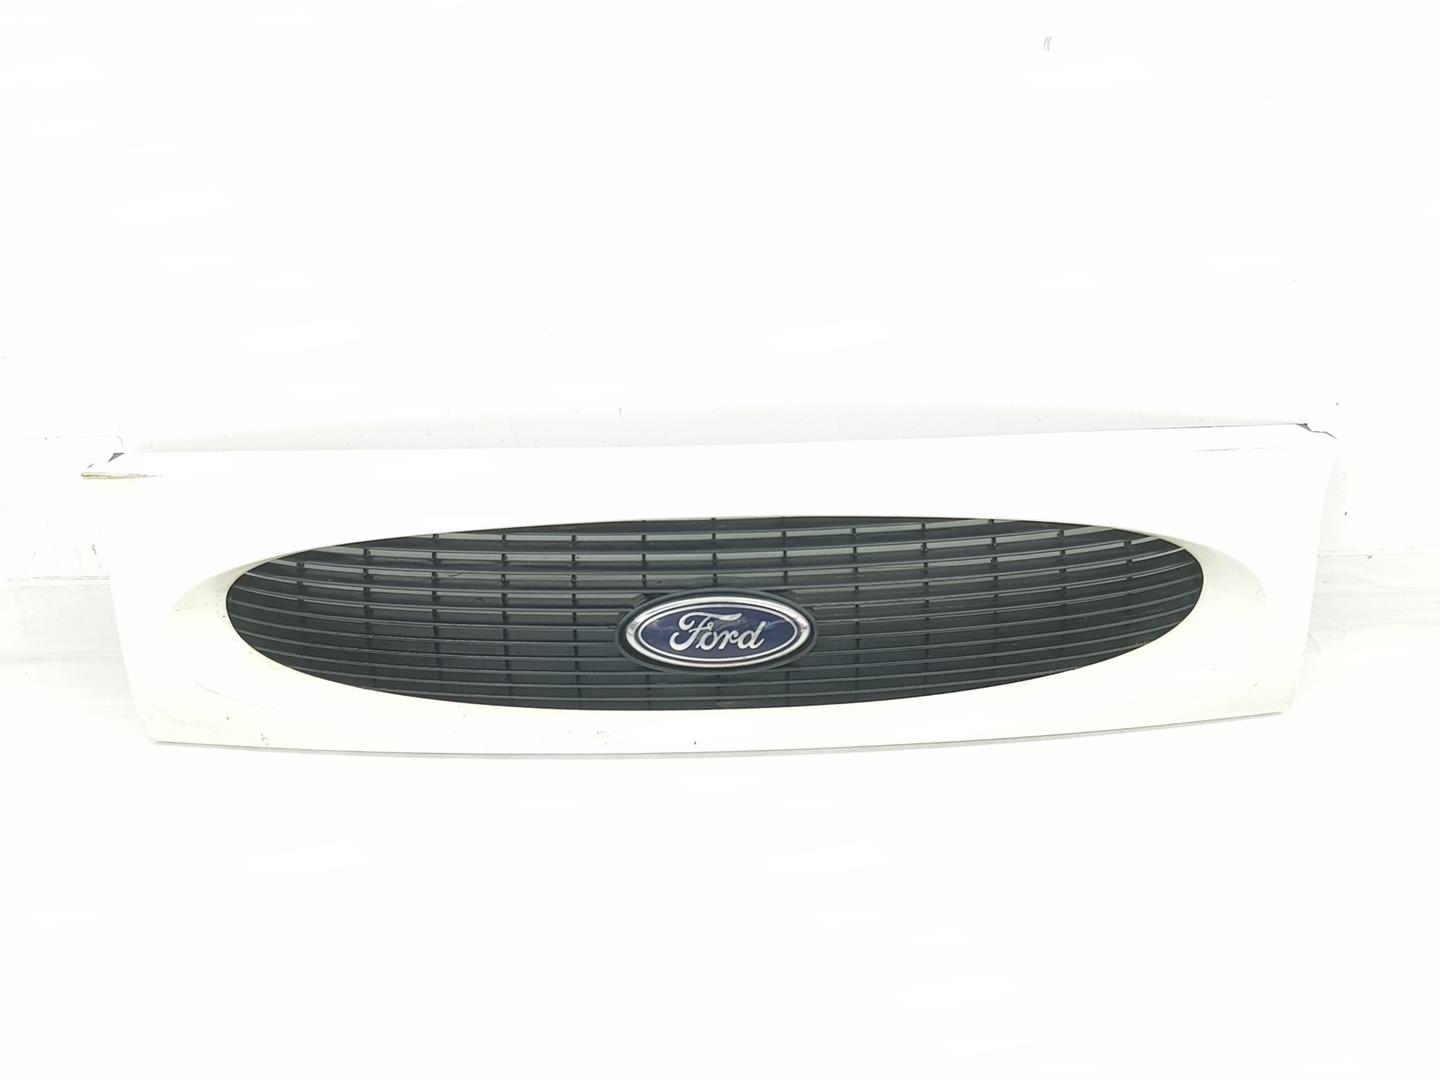 FORD Transit Radiator Grille 1021902, 96FB8A133AC, COLORBLANCO 21693918